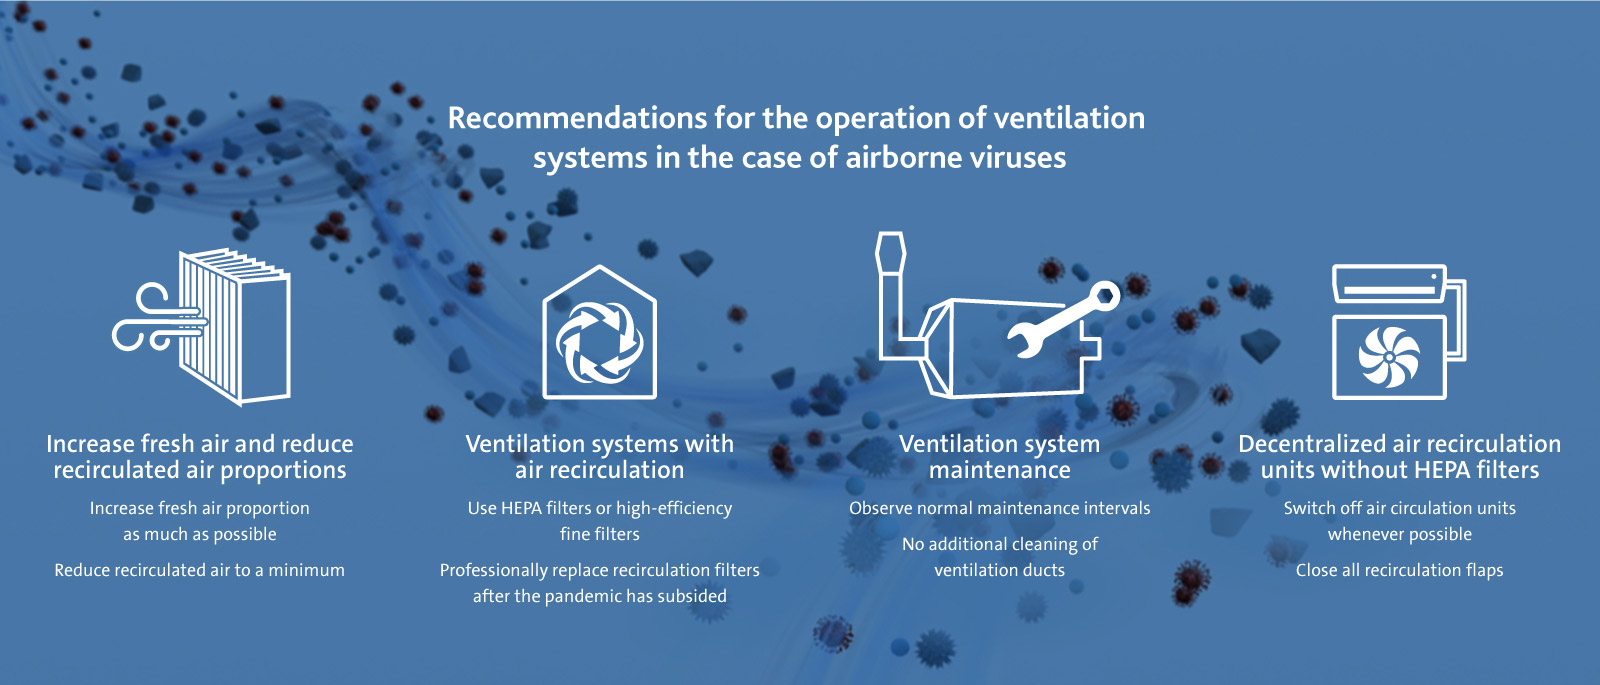 Recommendations for the operation of ventilation systems in the case of airborne viruses